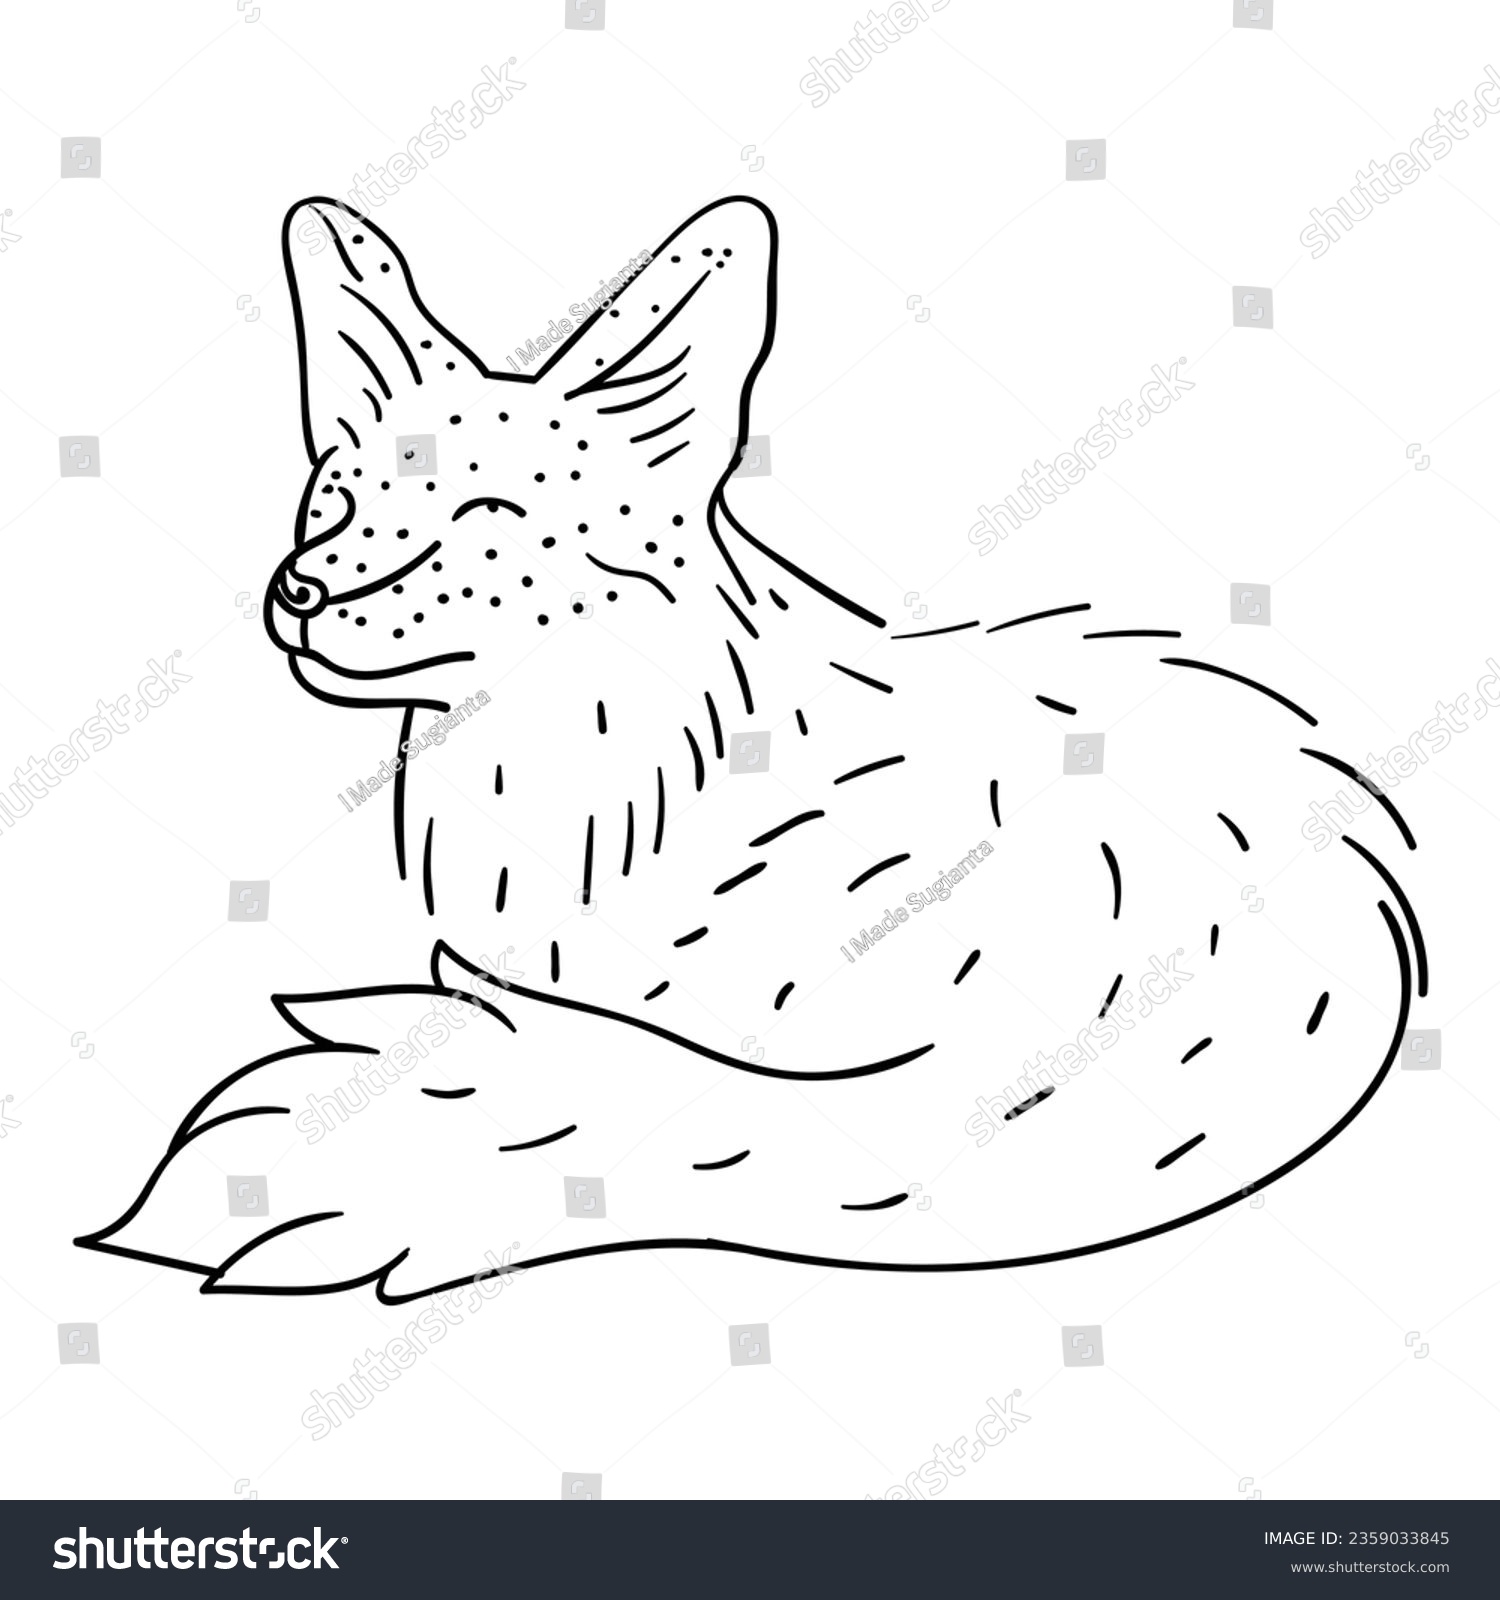 SVG of Hand drawing style of fox vector. Suitable for animals icon, sign or symbol. svg